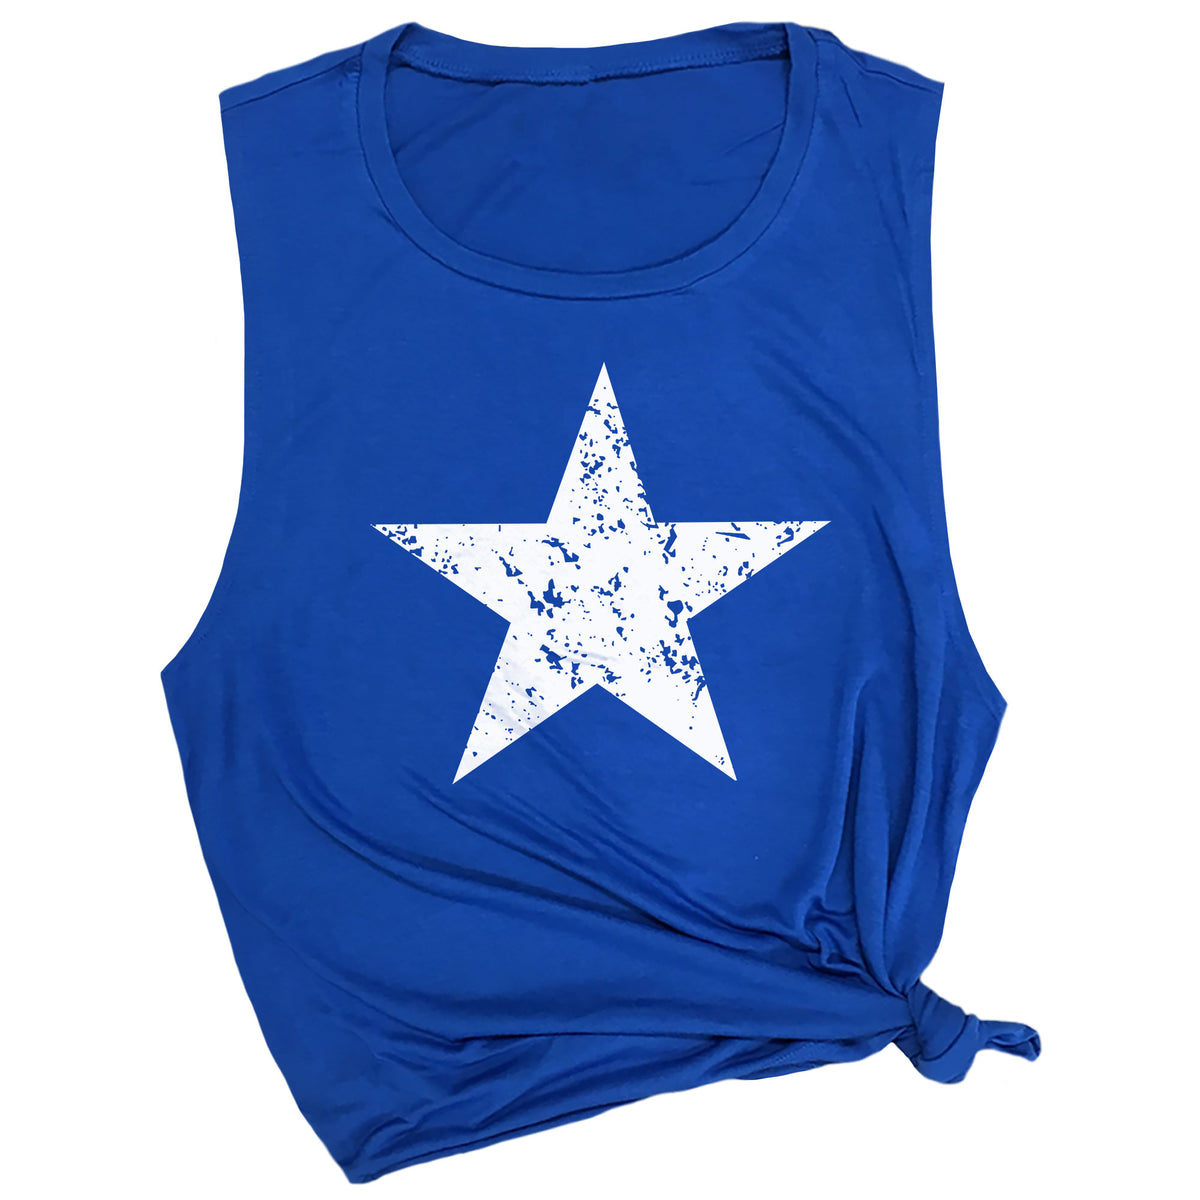 Distressed Star Muscle Tee